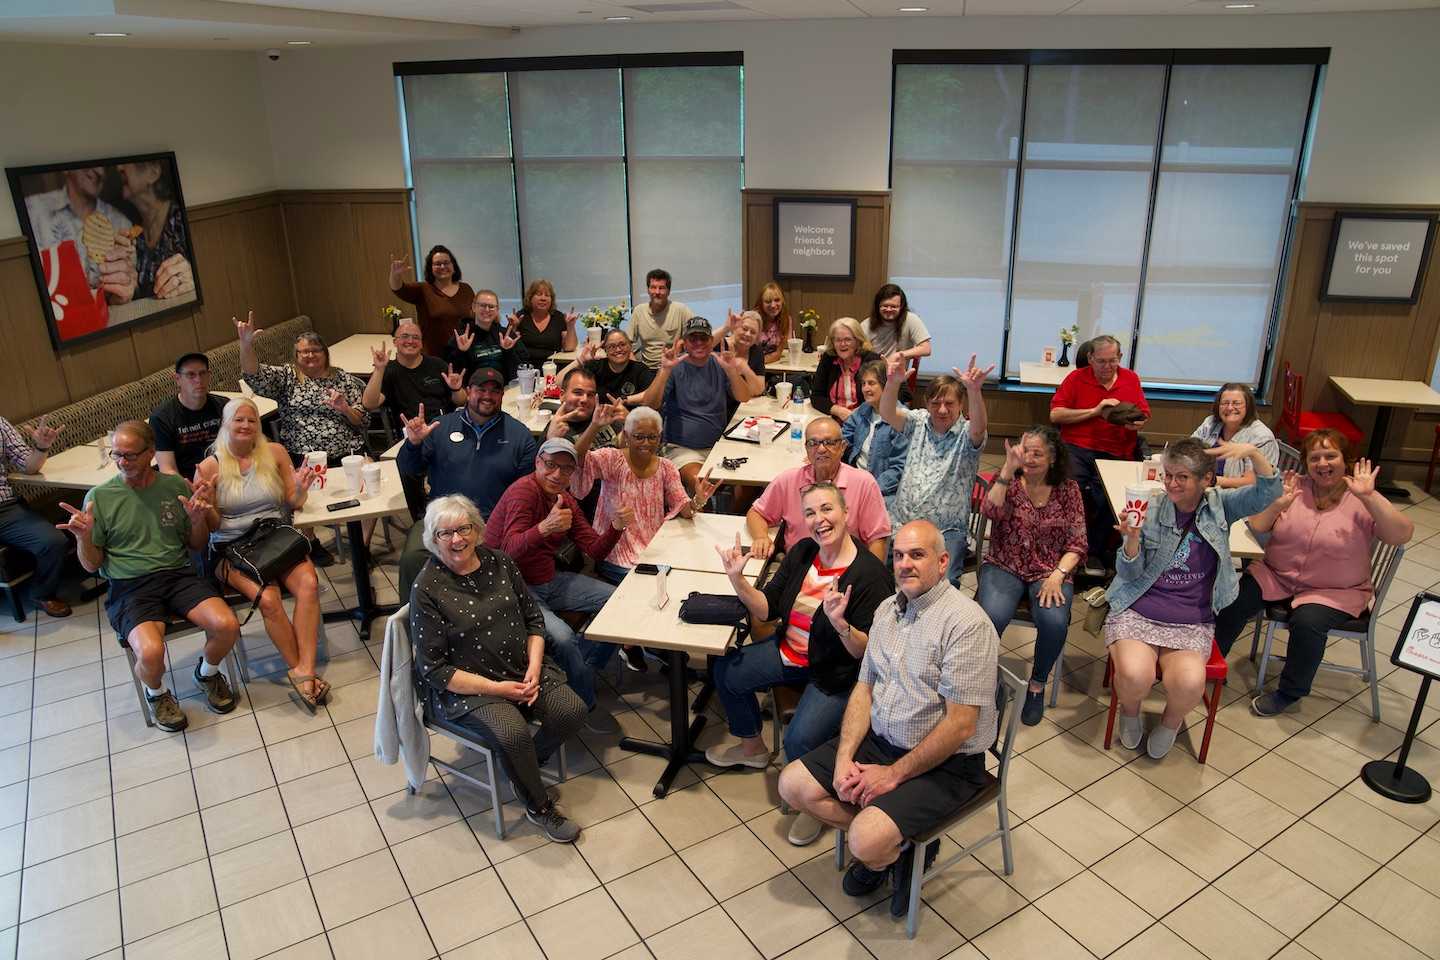 Participants of a Deaf Chat Night, bringing together both Deaf and hearing members of the community who communicate in American Sign Language over a meal, are seated in a Chick-fil-A restaurant. 